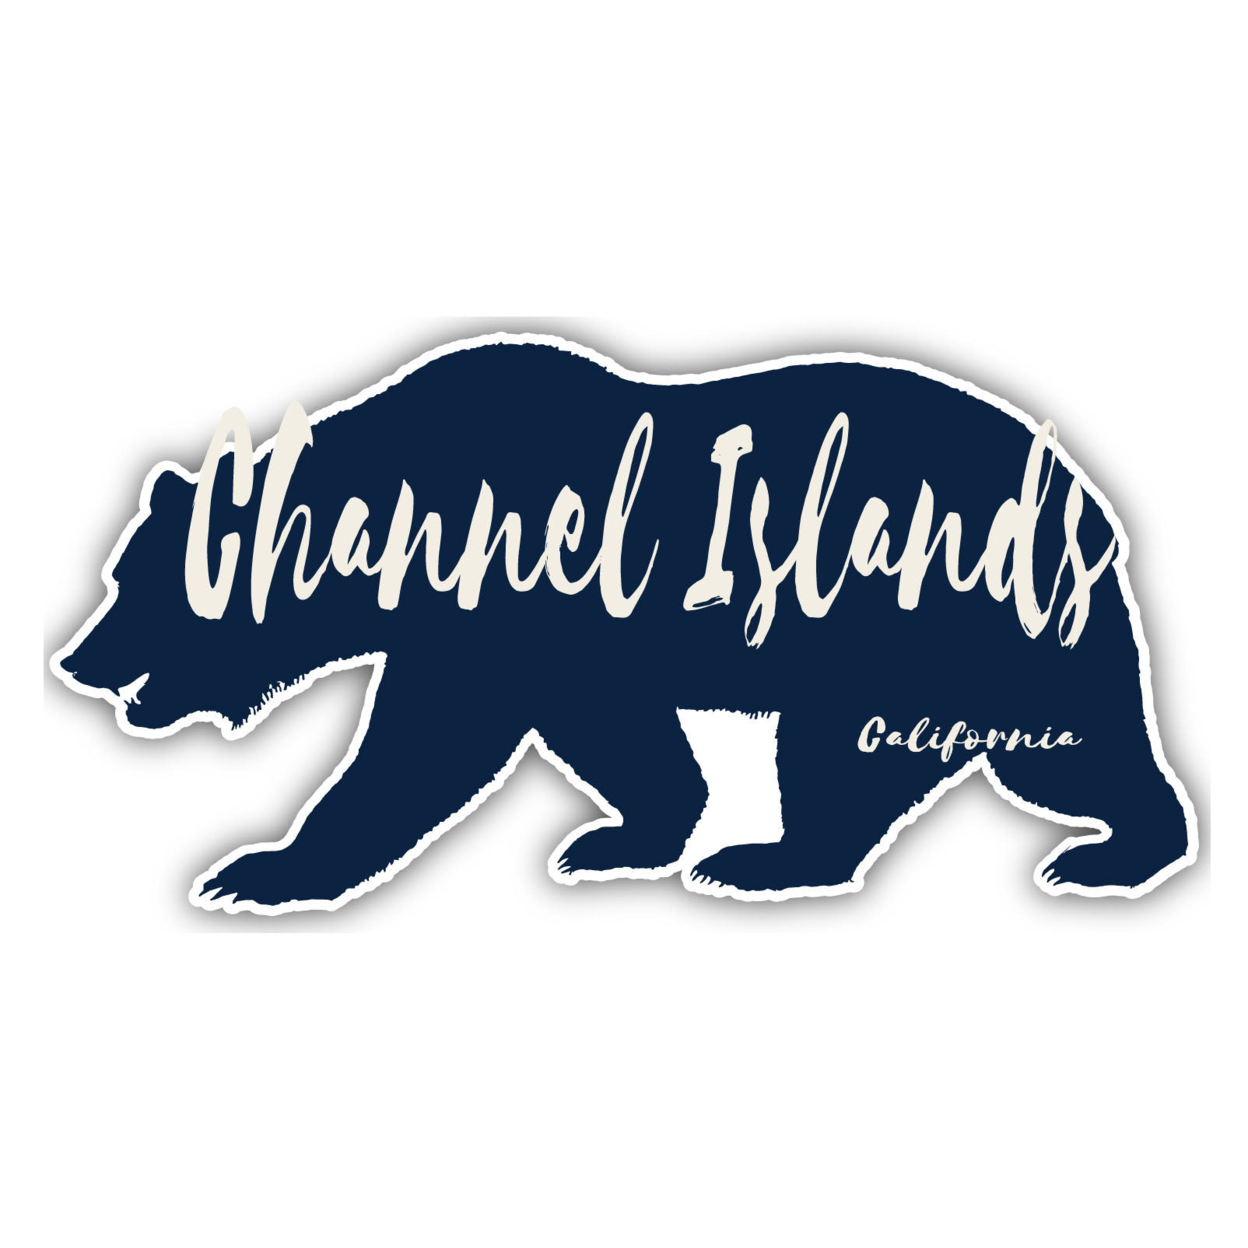 Channel Islands California Souvenir Decorative Stickers (Choose Theme And Size) - 4-Pack, 12-Inch, Bear